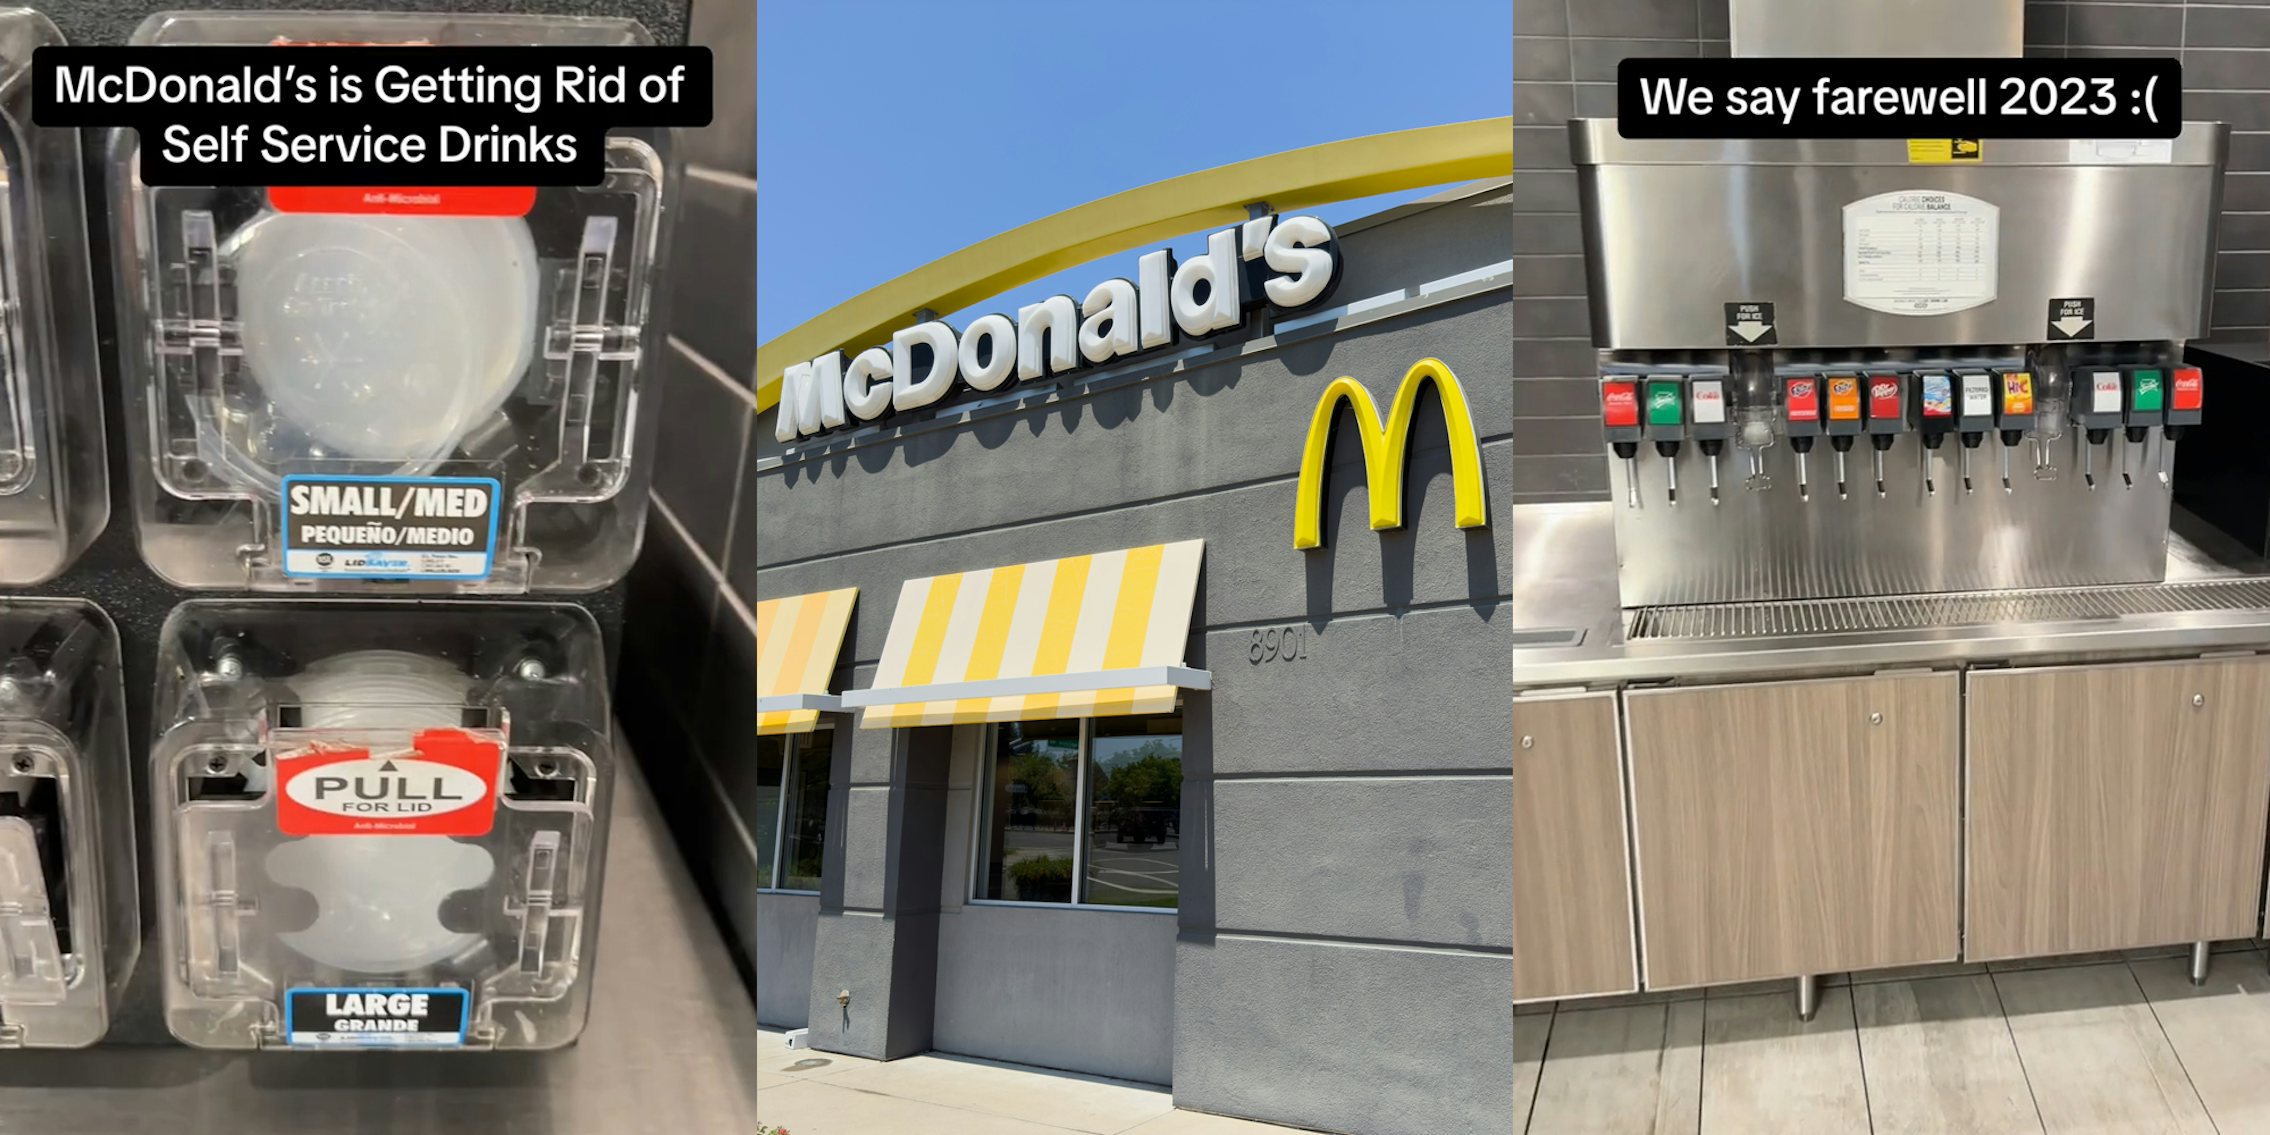 McDonald's self service drink station lids with caption 'McDonald's is Getting Rid of Self Serve Drinks' (l) McDonald's building with signs (c) McDonald's self serve drink station with caption 'We say farewell 2023:(' (r)